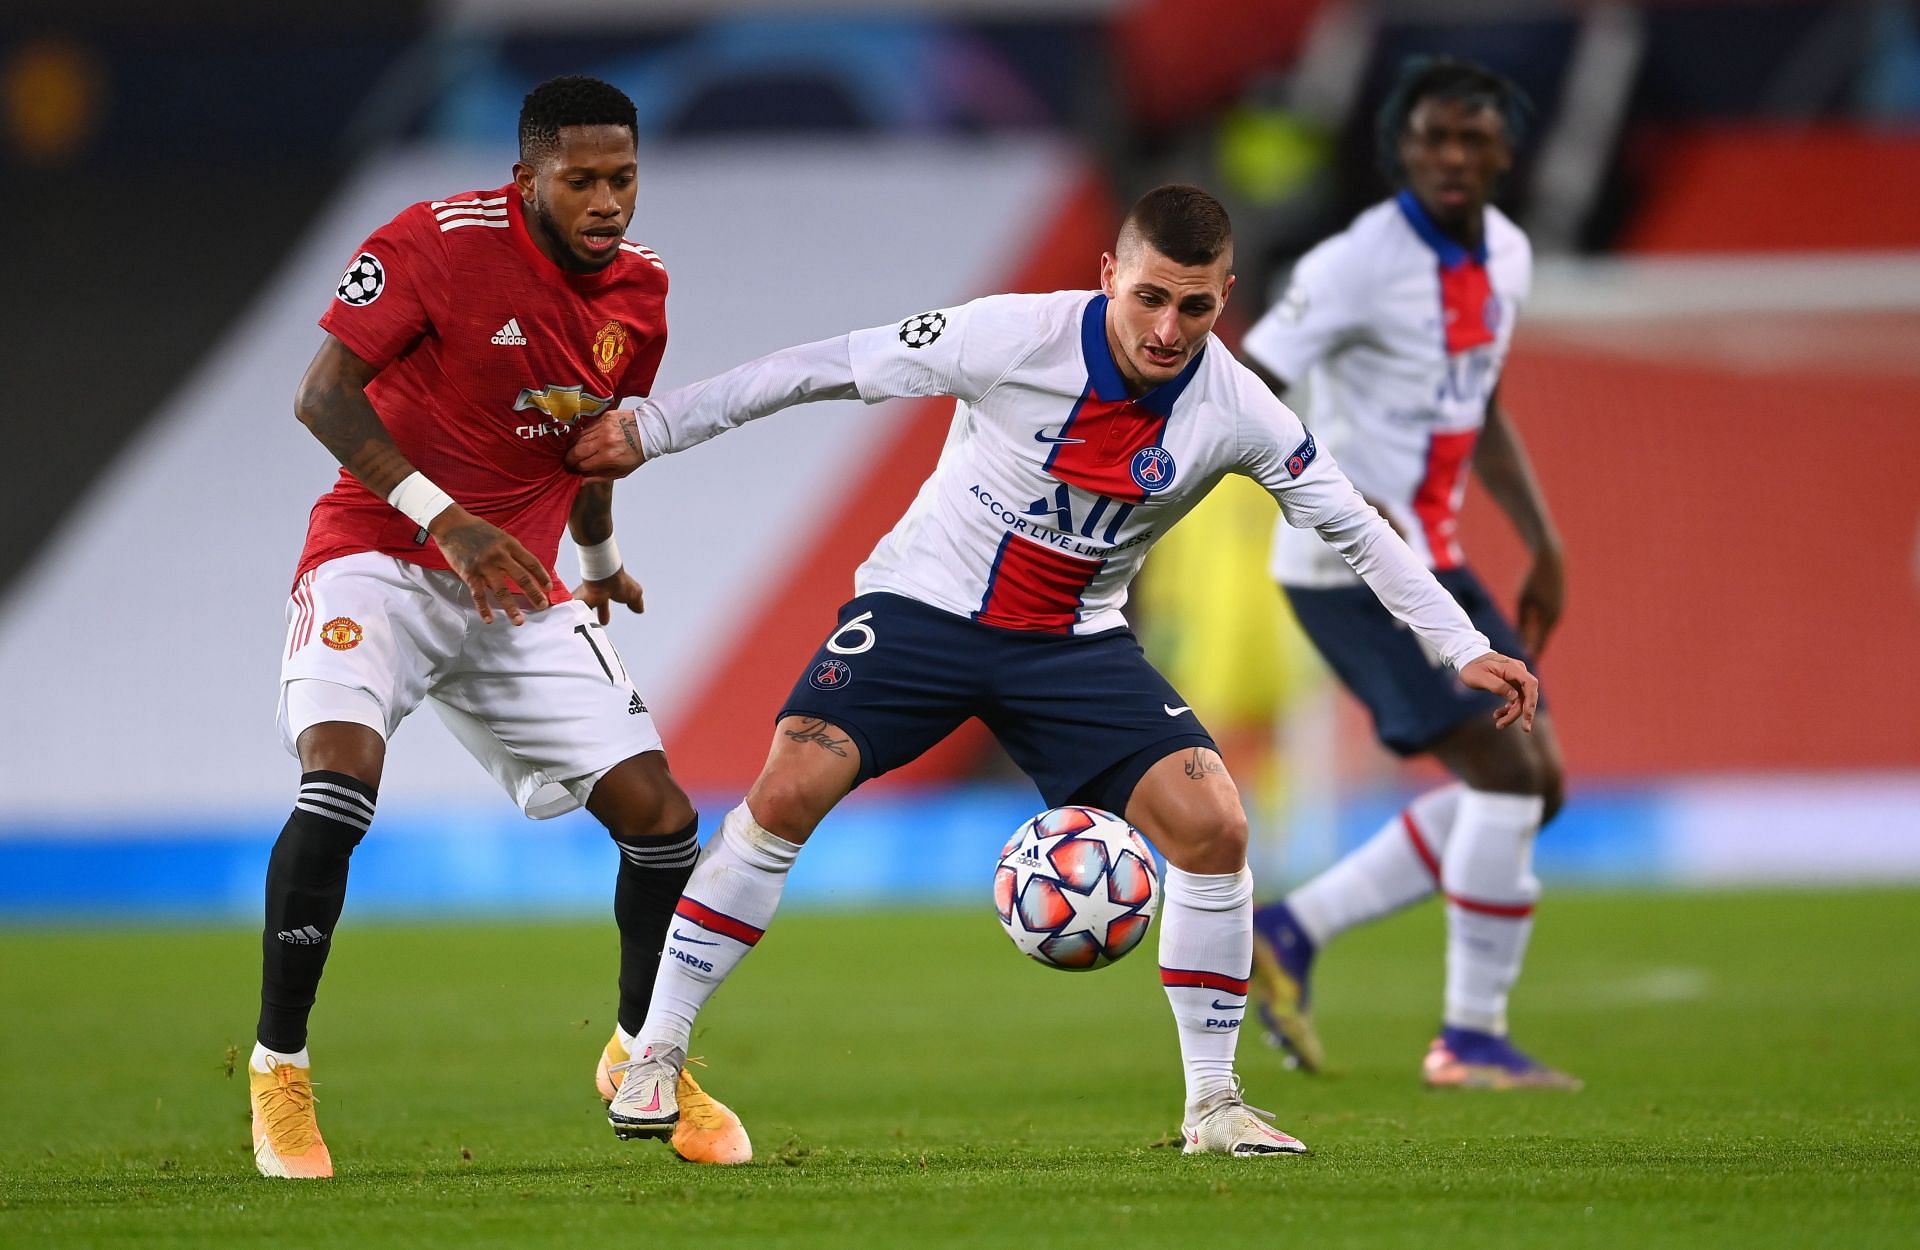 Marci Verratti (#6) in Champions League action against Manchester United